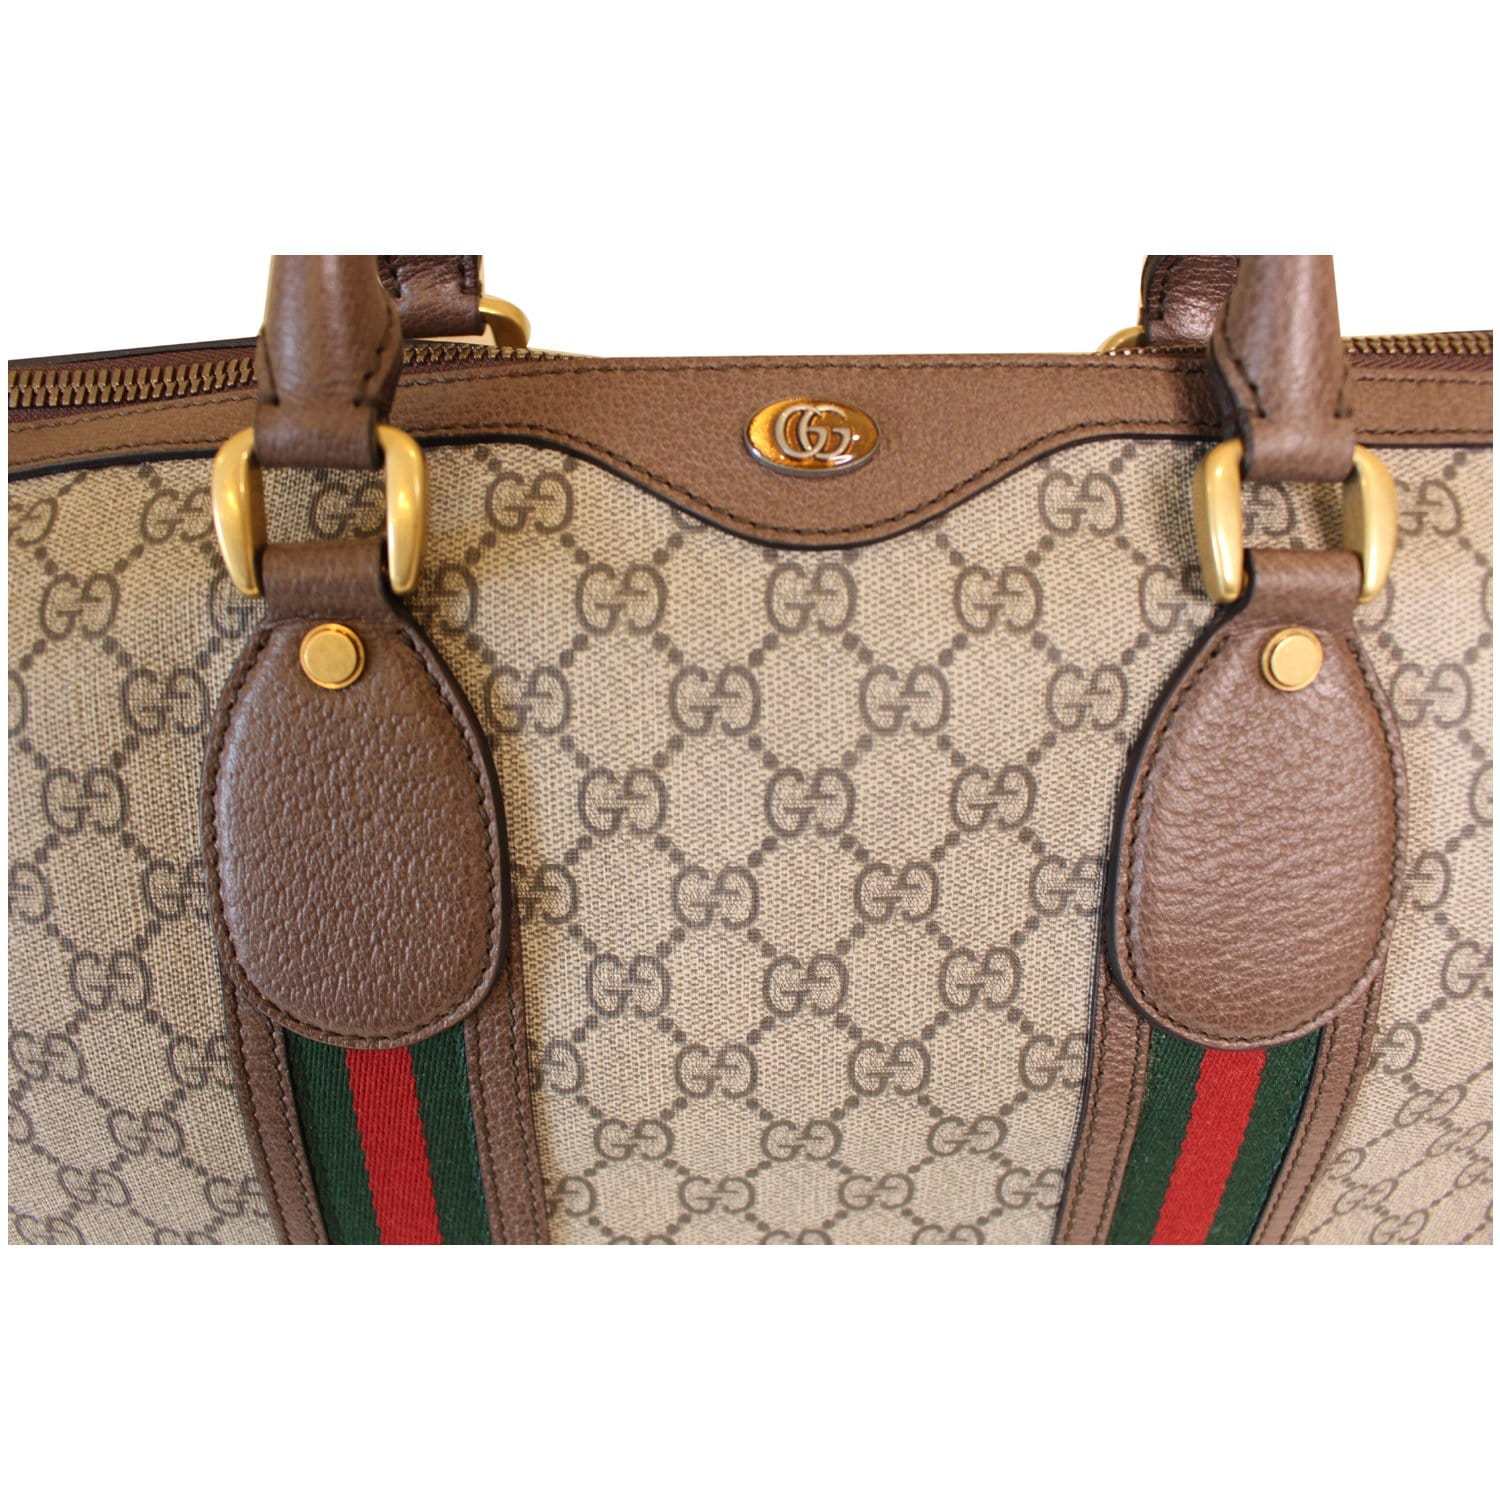 Gucci GG Supreme Large Canvas Duffle Bag in Brown